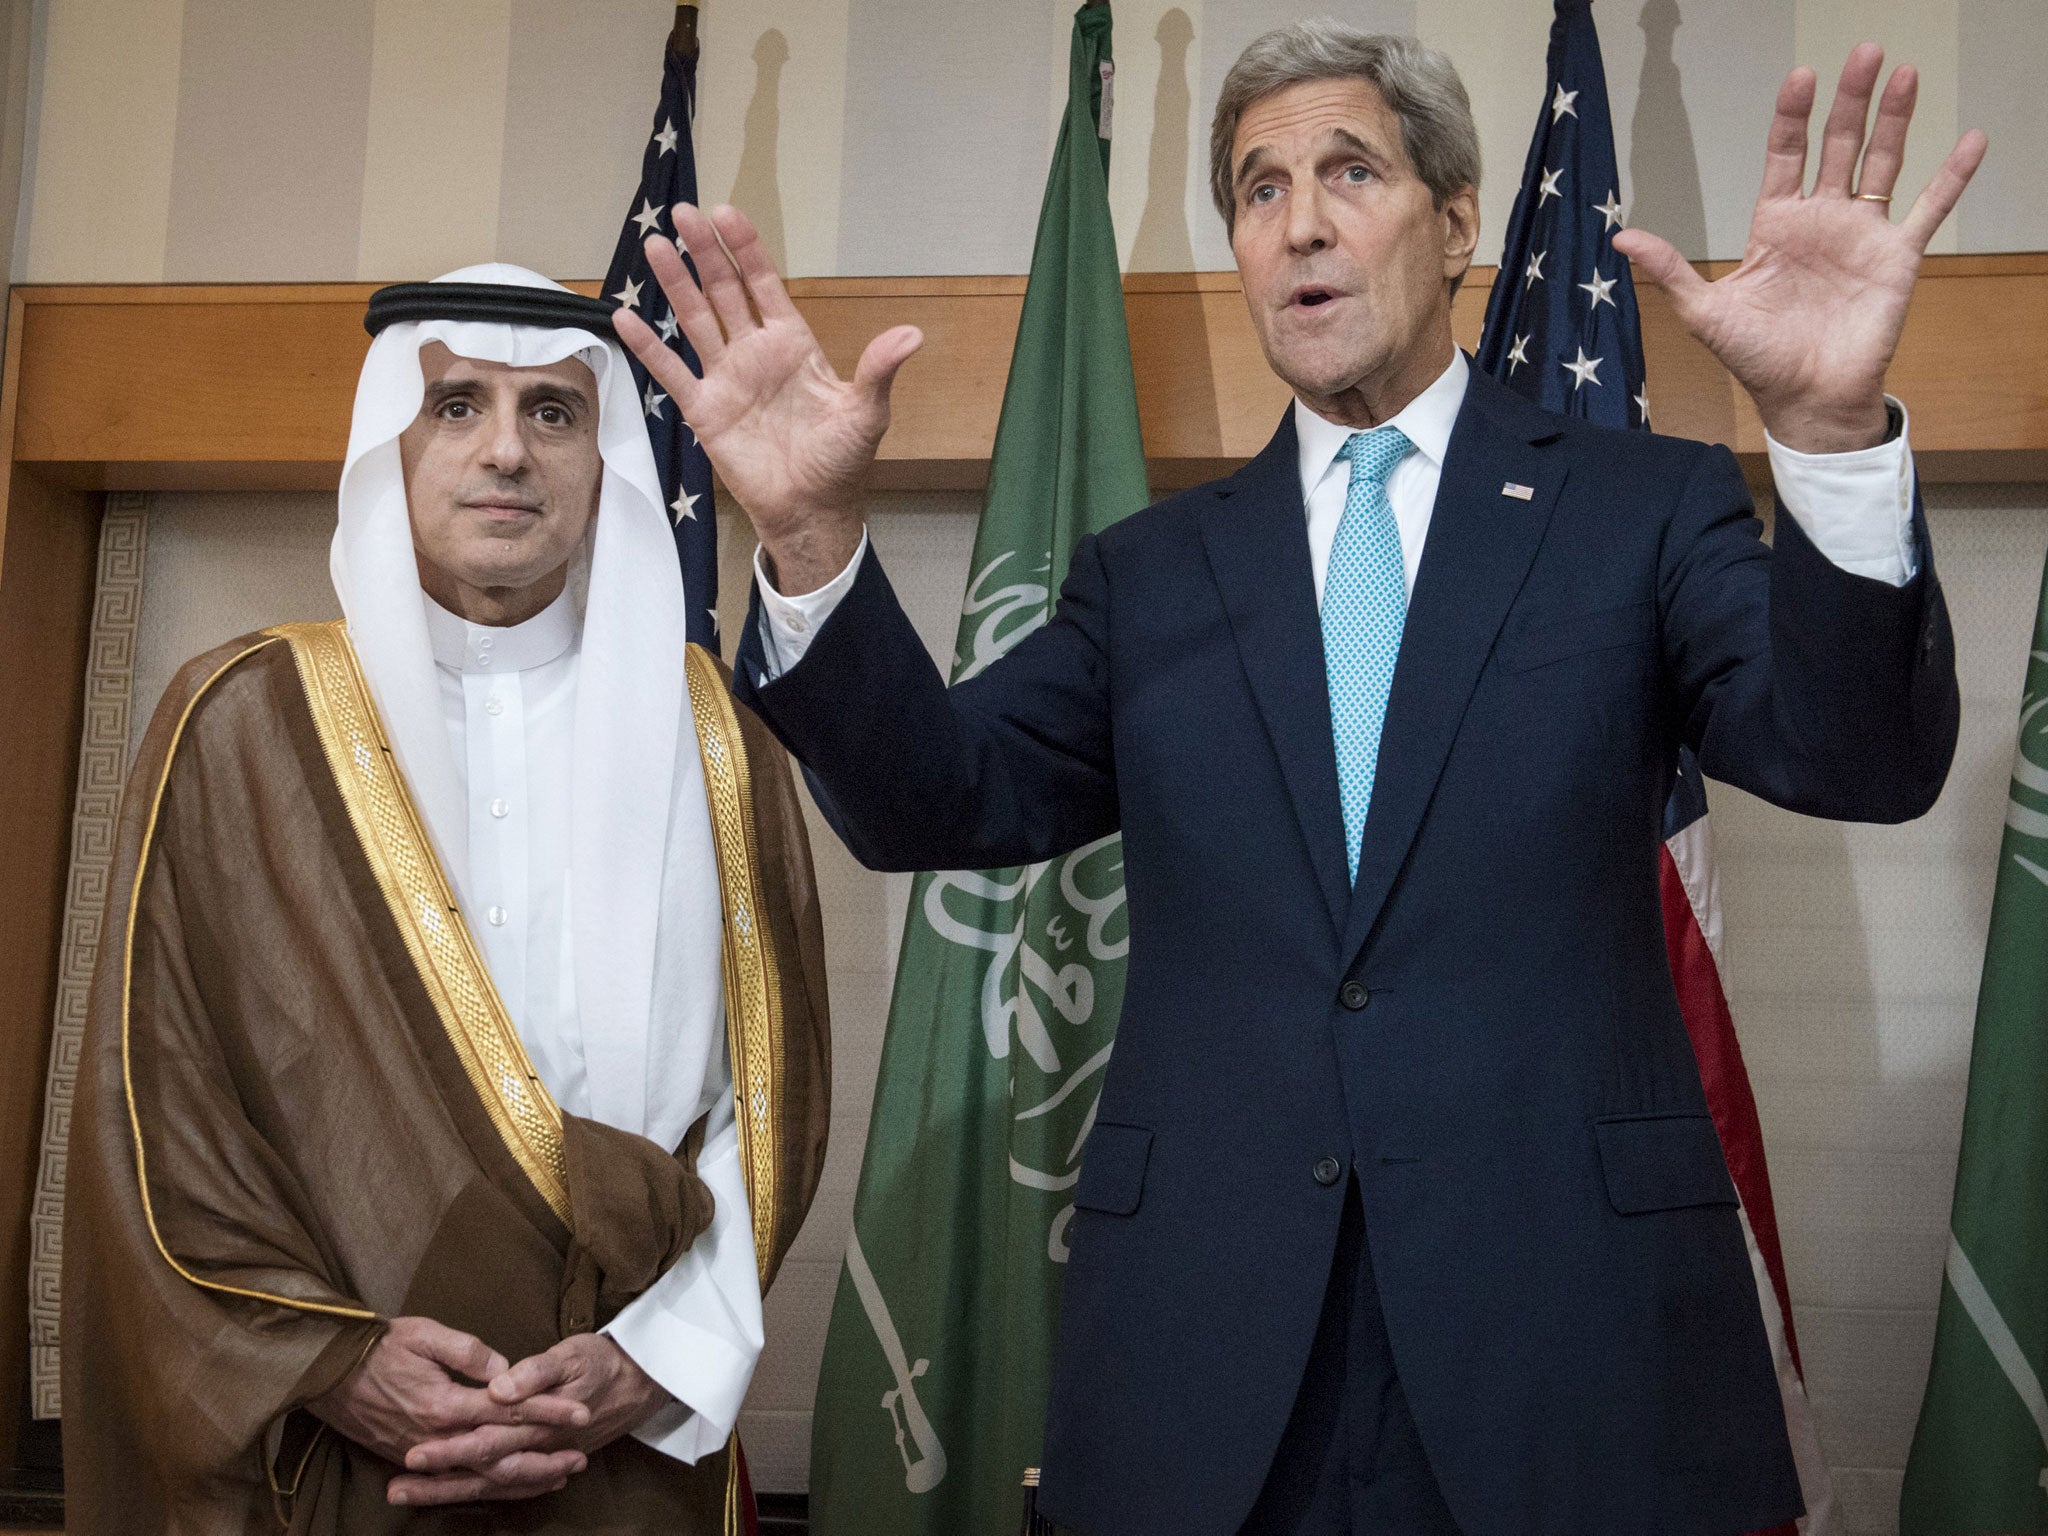 US Secretary of State John Kerry meets with Adel Ahmed Al-Jubeir, Foreign Minister of Saudi Arabia